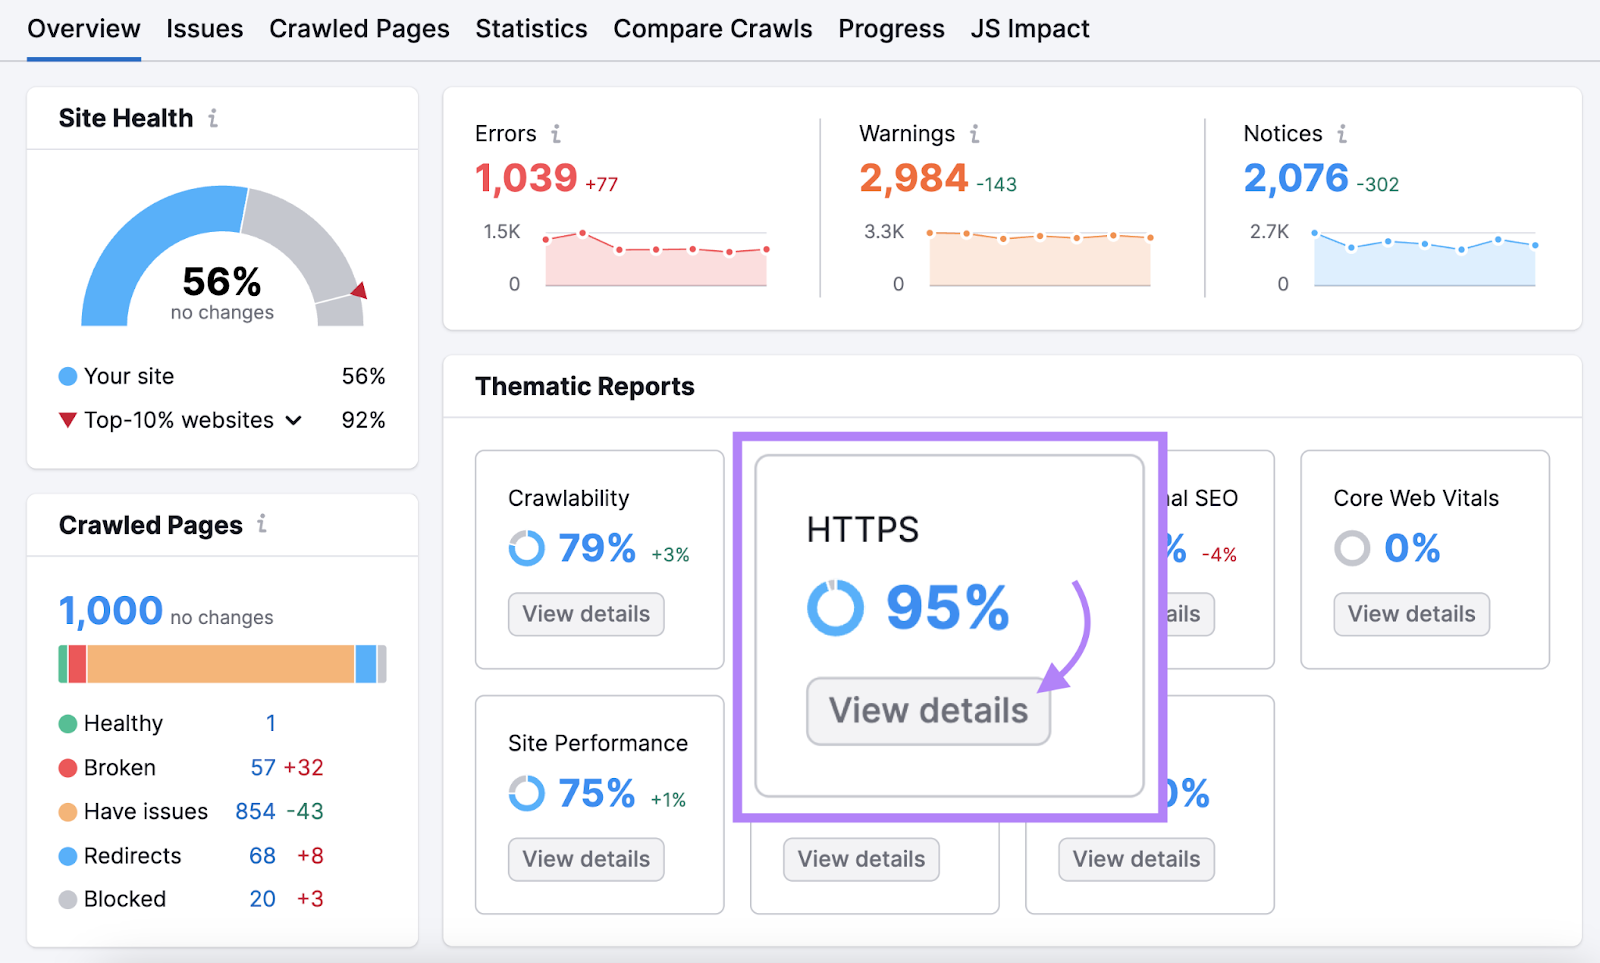 “HTTPS” widget highlighted nether  "Thematic Reports" conception  successful  Site Audit's overview report